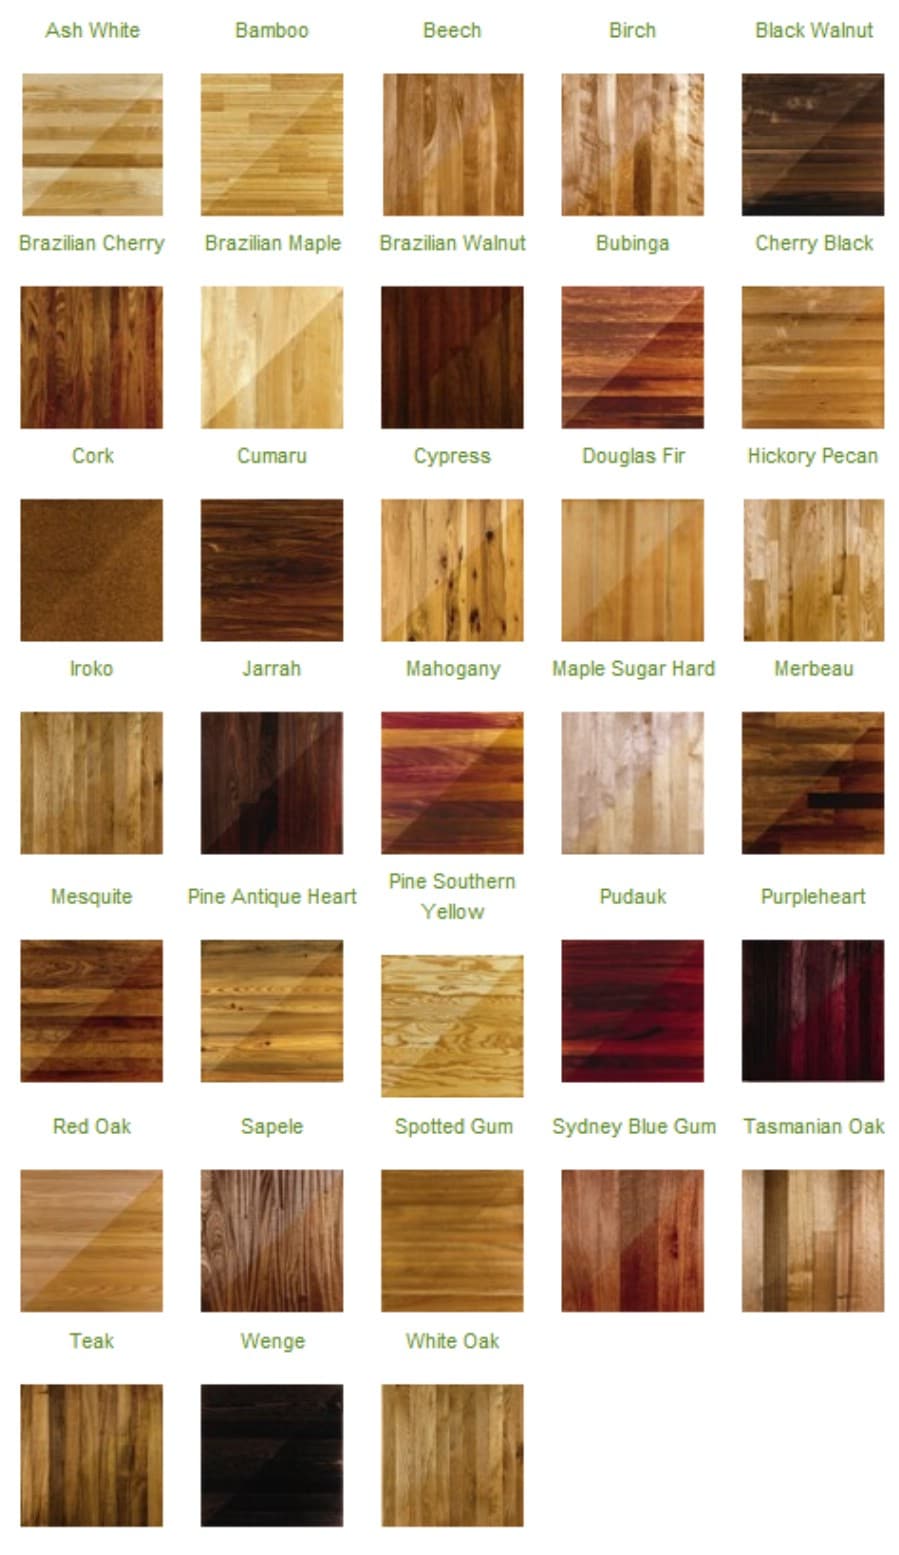 1. Know your hardwood - 50 Amazingly Clever Cheat Sheets To Simplify Home Decorating Projects